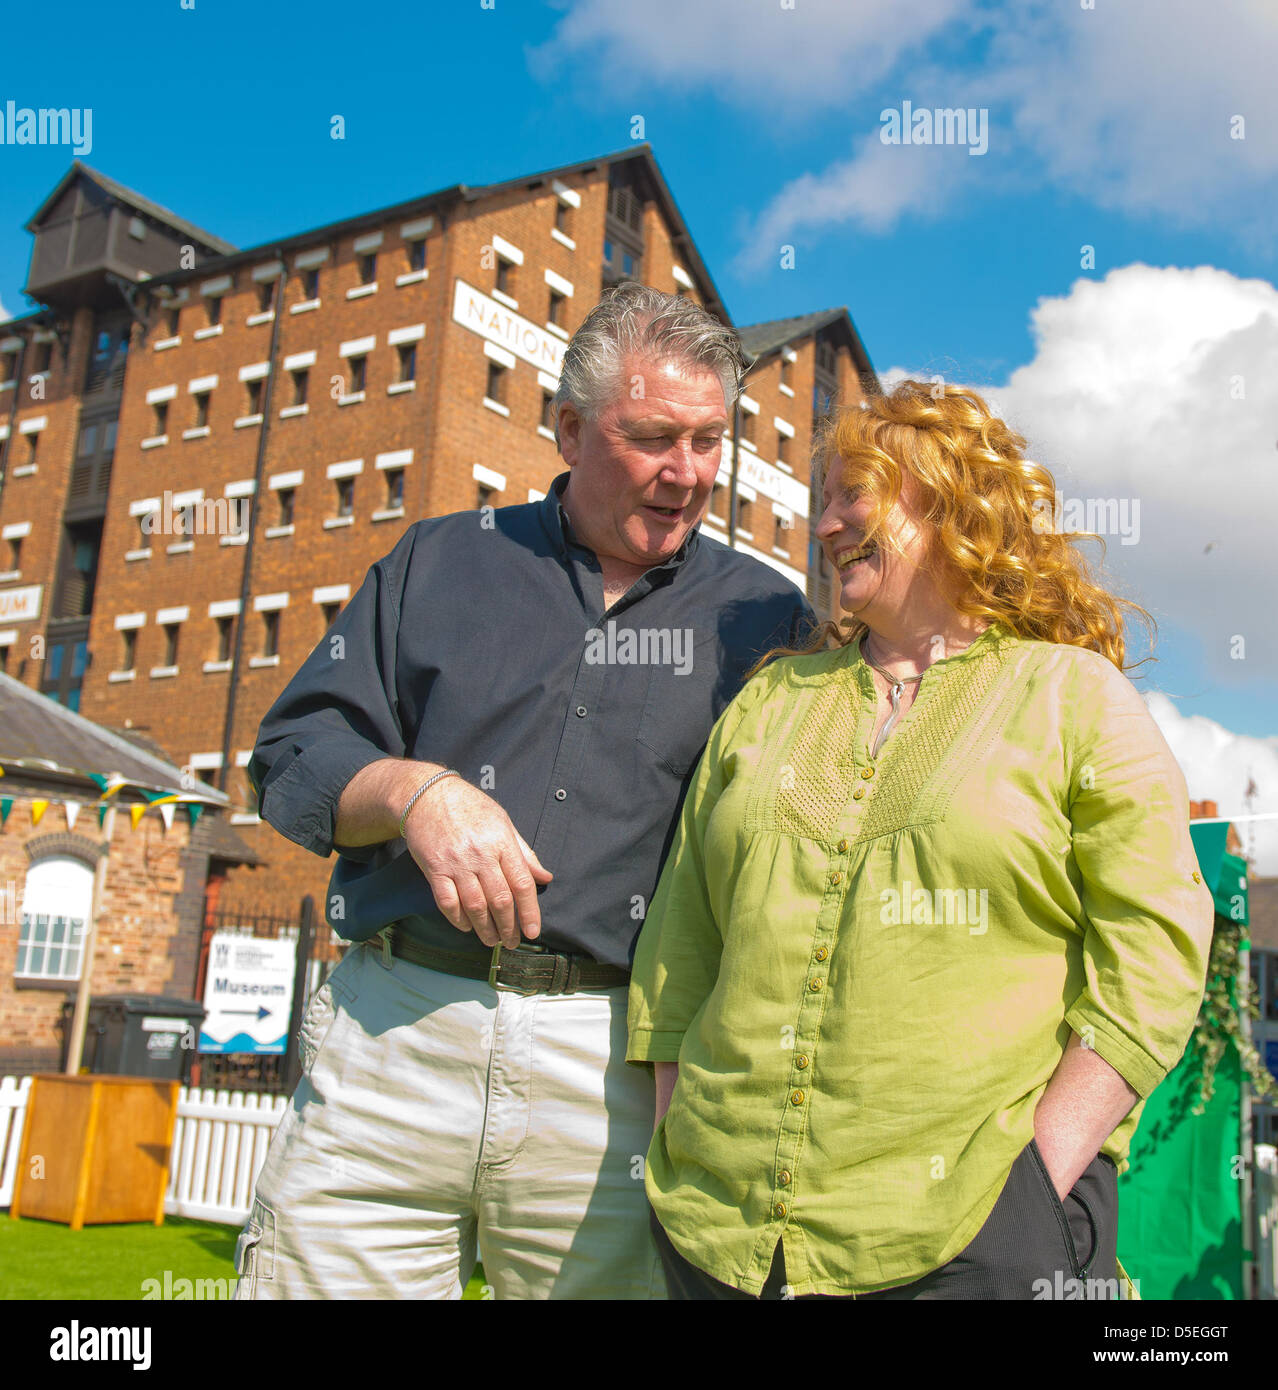 Picture By: Charlie Bryan Picture :Gloucester UK. TV Presenter Charlie Dimmock and Tommy Walsh attending the Home and Garden Party at Gloucester Quays Shopping Outlet. Date  30/03/2013 Stock Photo